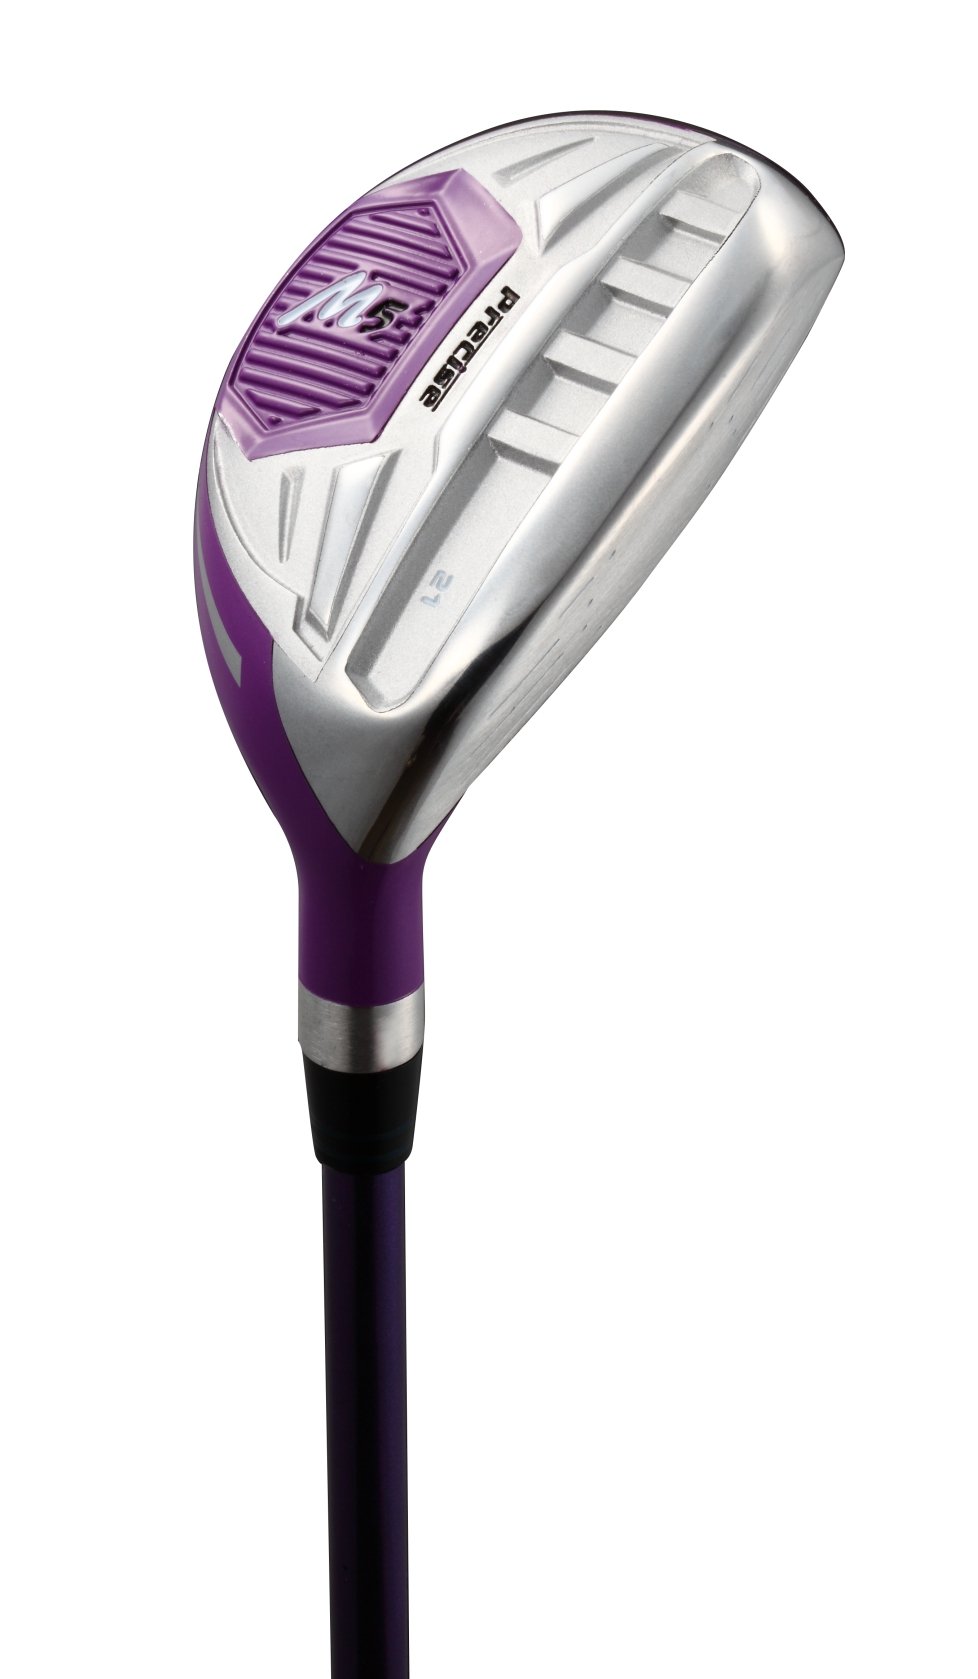 Precise Top Line Ladies Purple Right Handed M5 Golf Club Set, 460cc Driver, 3 Wood, 21* Hybrid, 5, 6, 7, 8, 9, PW Stainless Steel Irons, Putter, Graphite Shafts for Woods & Irons +Stand Bag + 3 Covers